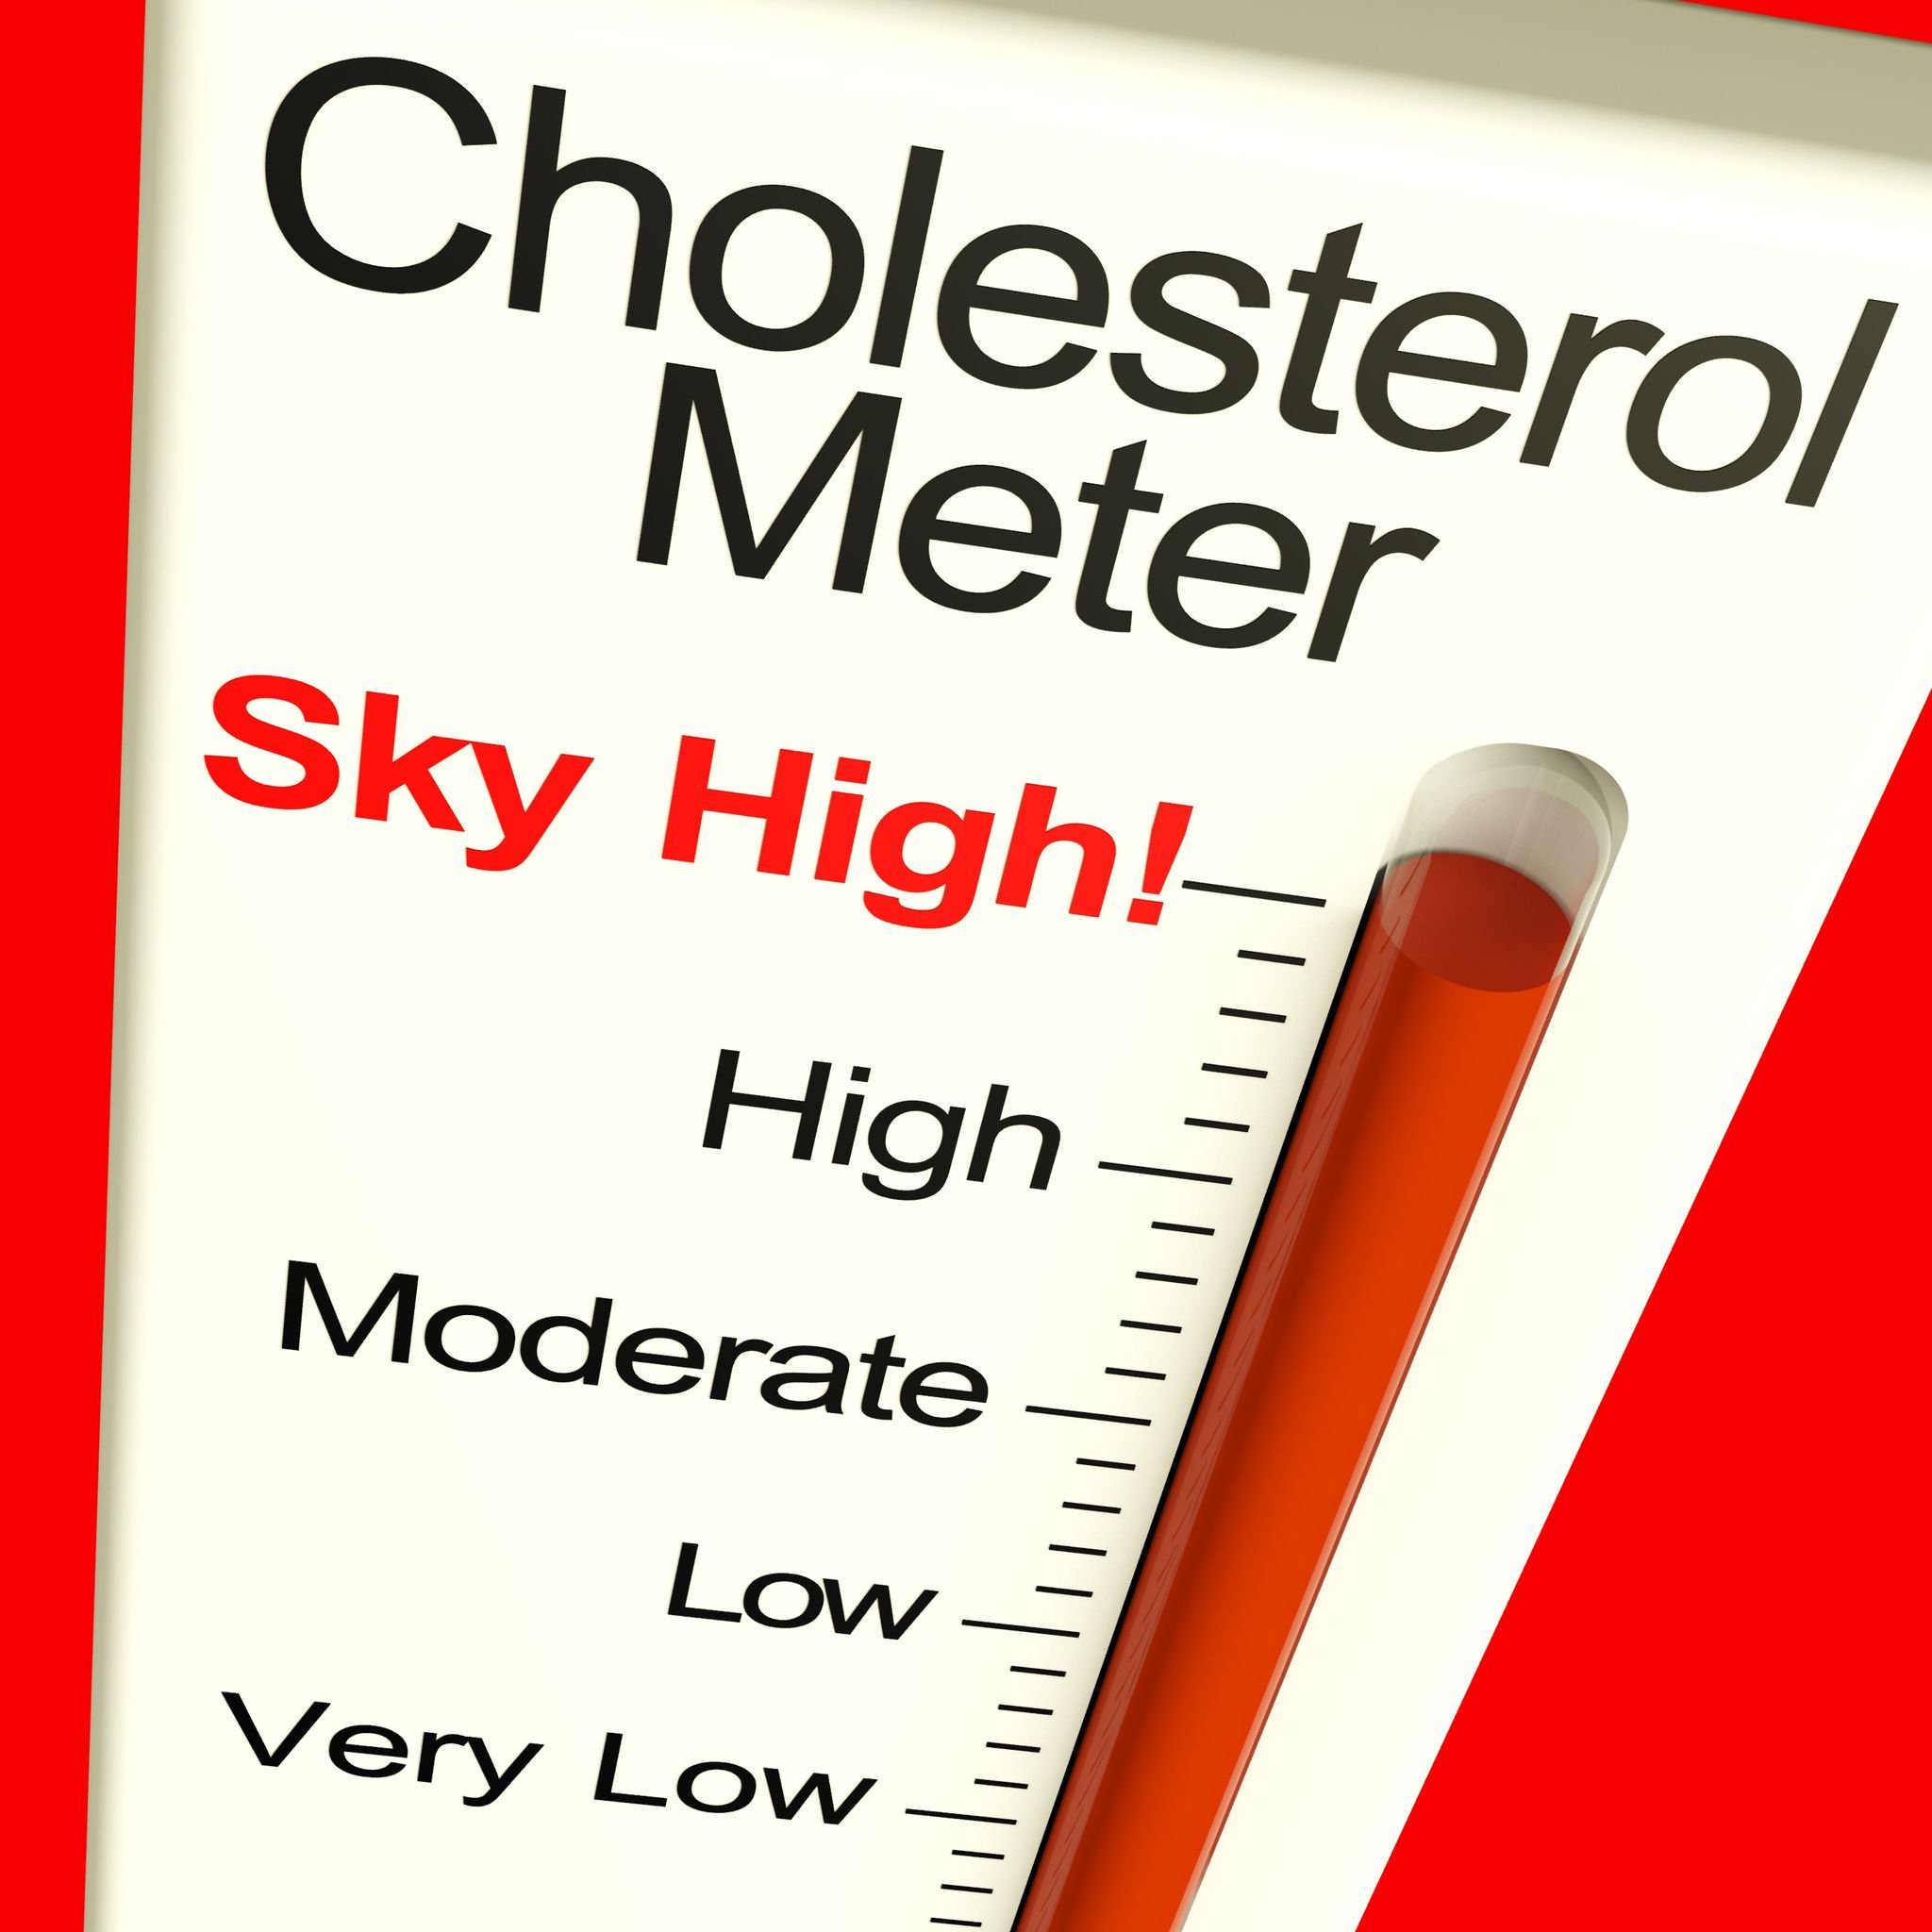 Study: This is How a High-Cholesterol Diet Increases Colon Cancer Risk